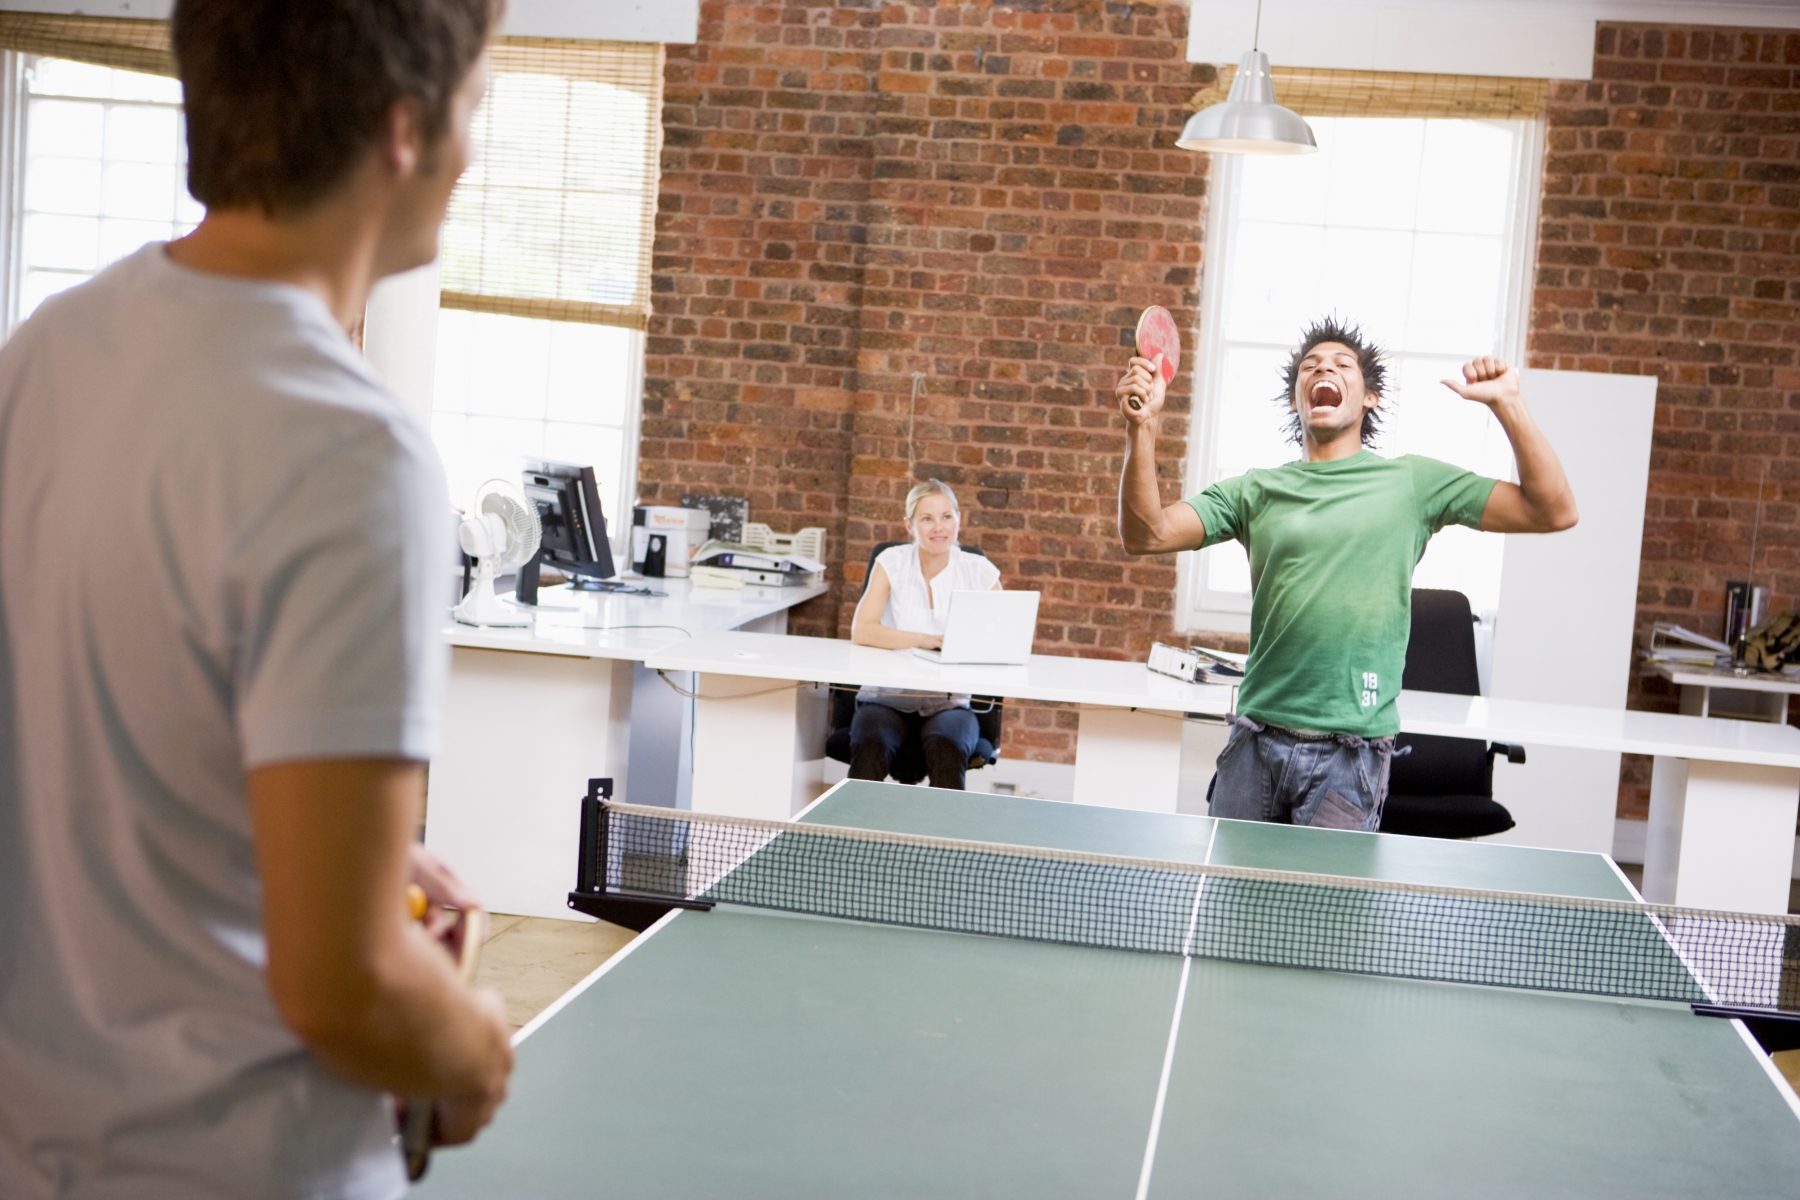 2130264-two-men-in-office-space-playing-ping-pong